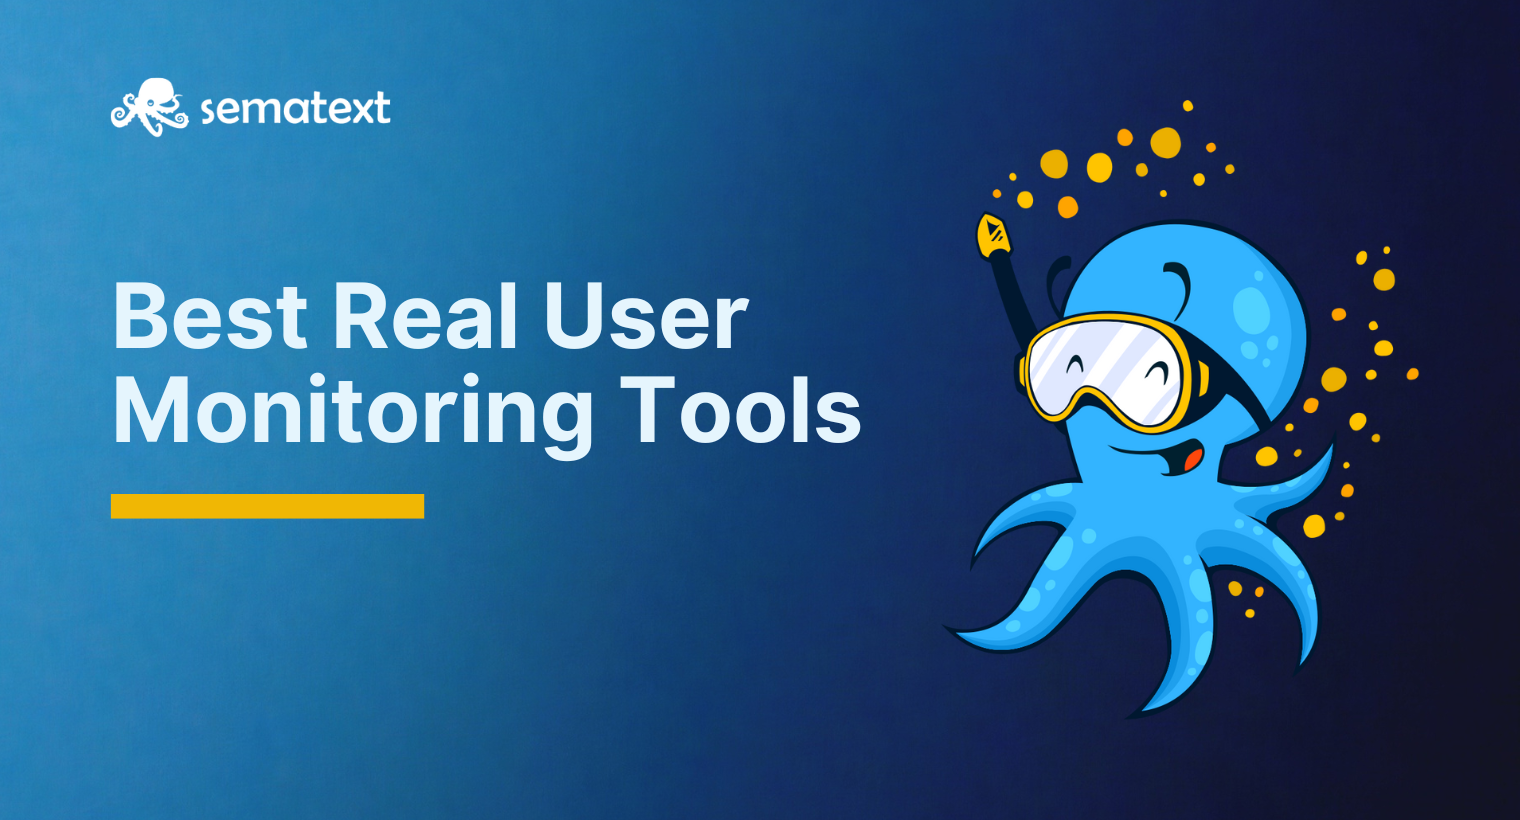 9 Best Real User Monitoring Tools and How to Choose One [2022 Review]